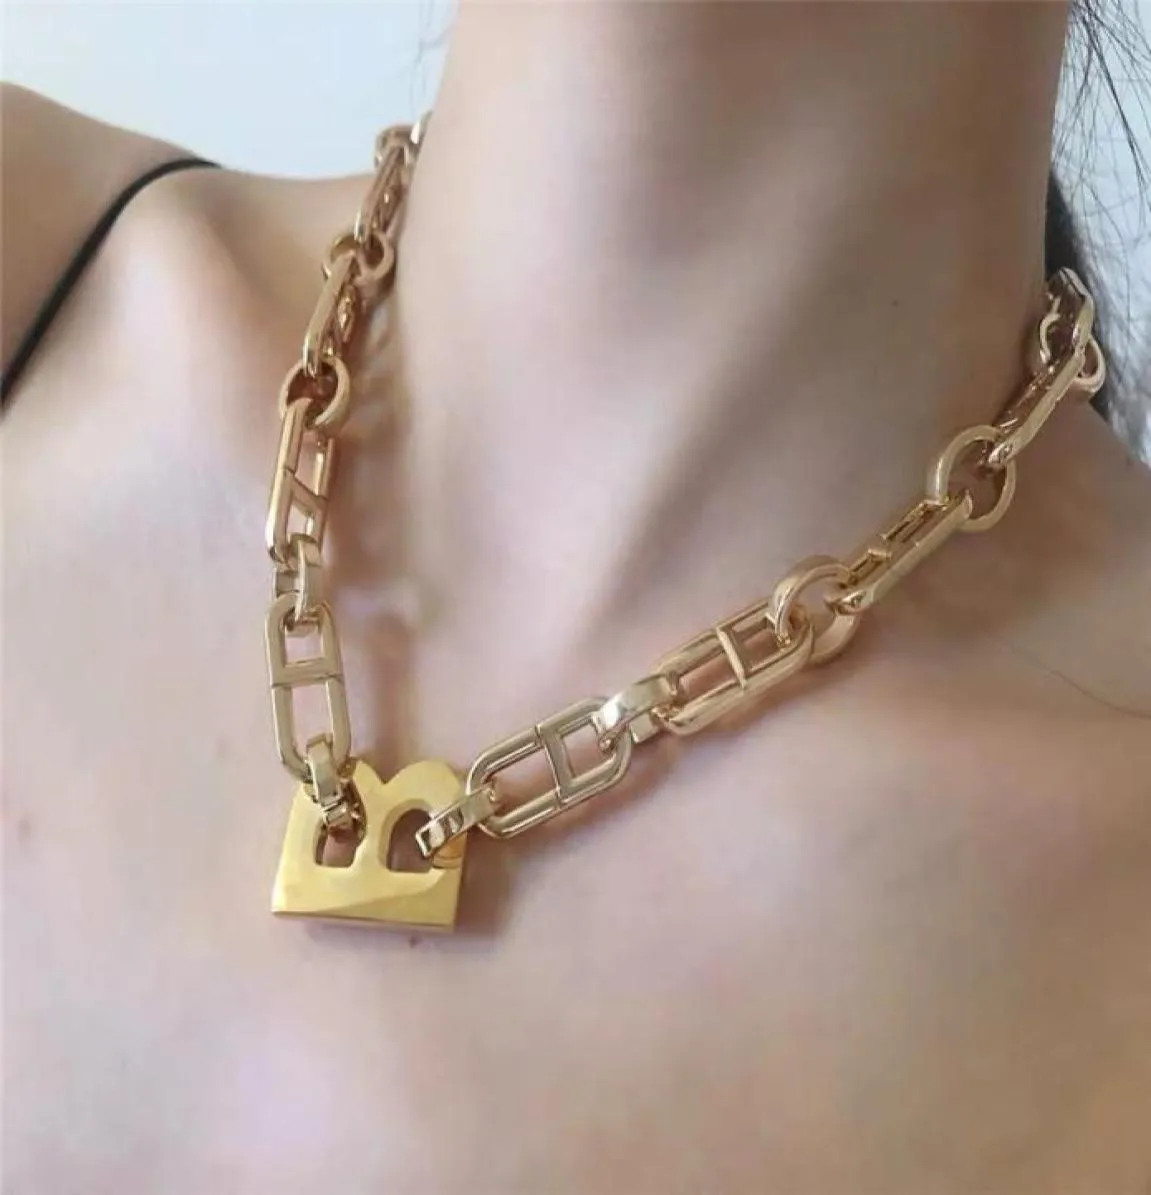 Pendant Necklaces Punk Rock Letter B Necklace For Women Men Designer Thick Link Chain Chunky Choker Fashion Hip Hop Jewelry4597723